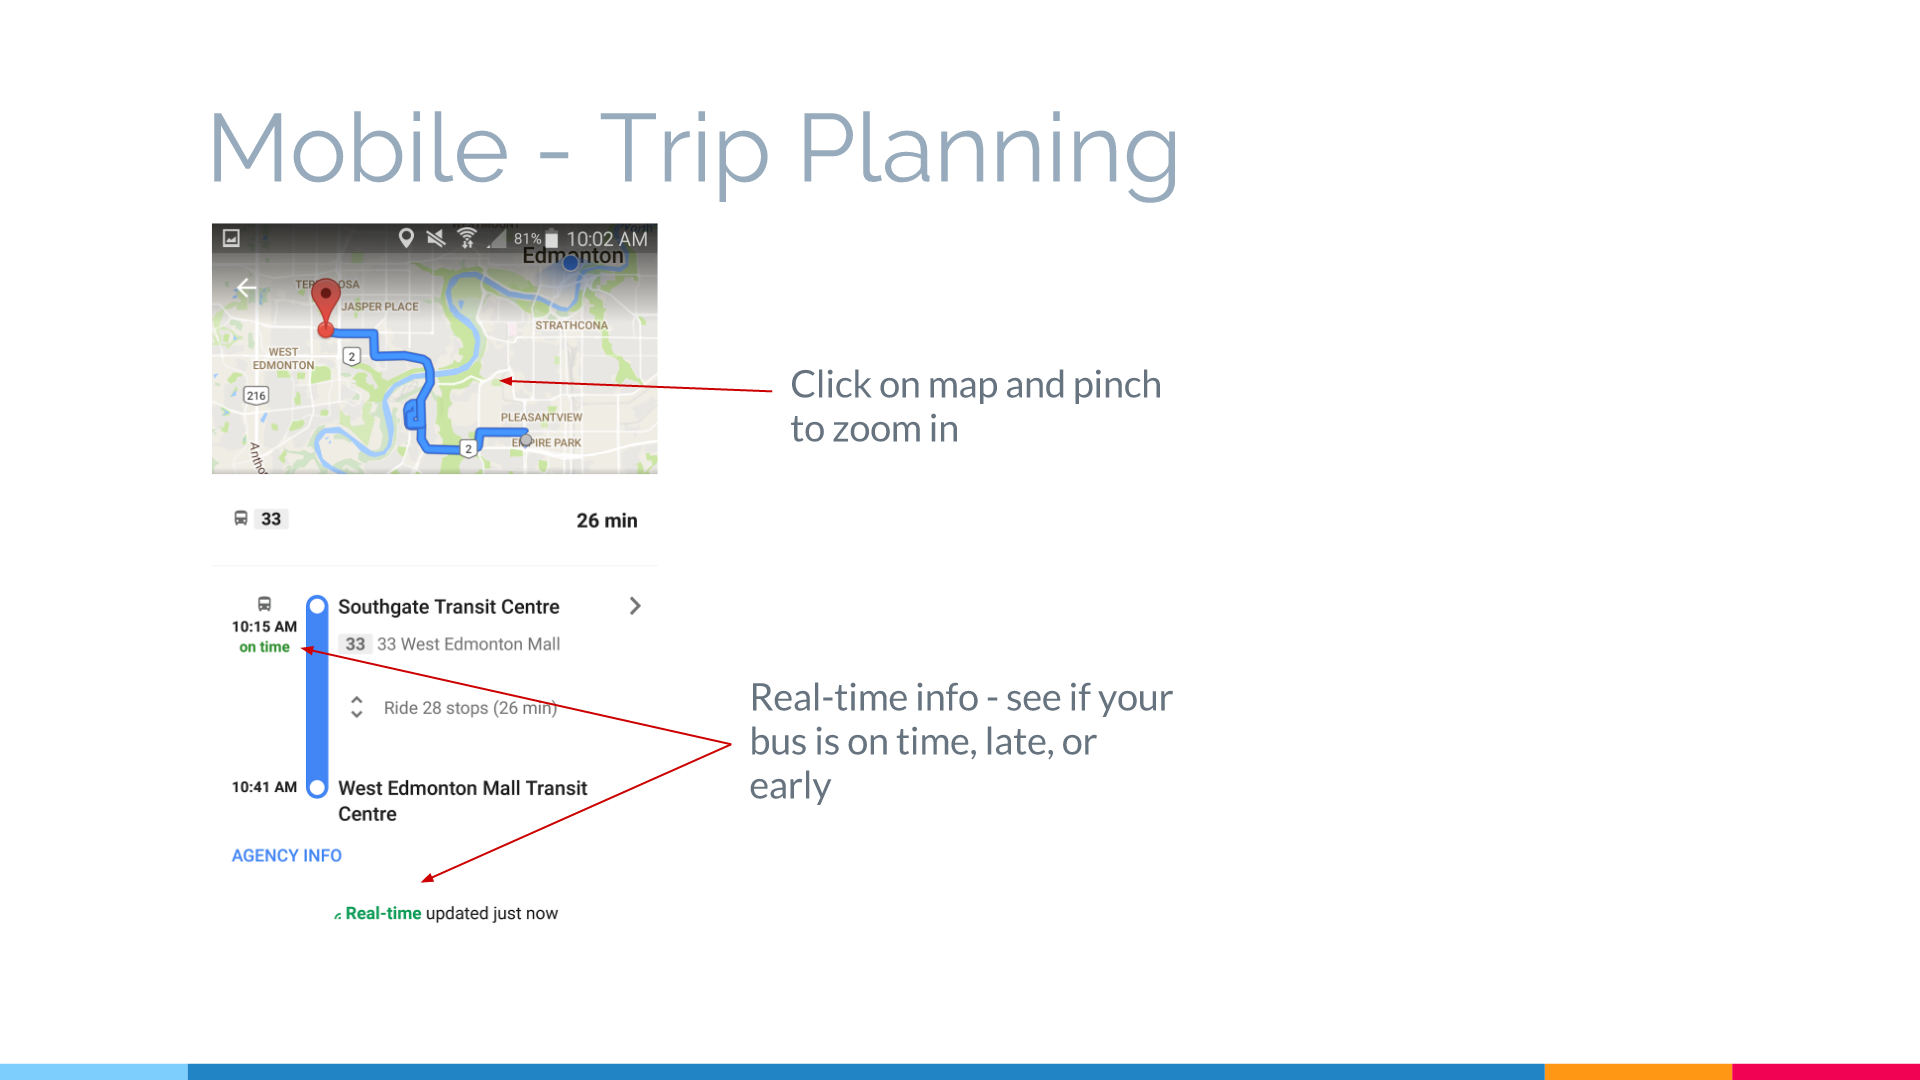 Mobile - Trip Planning